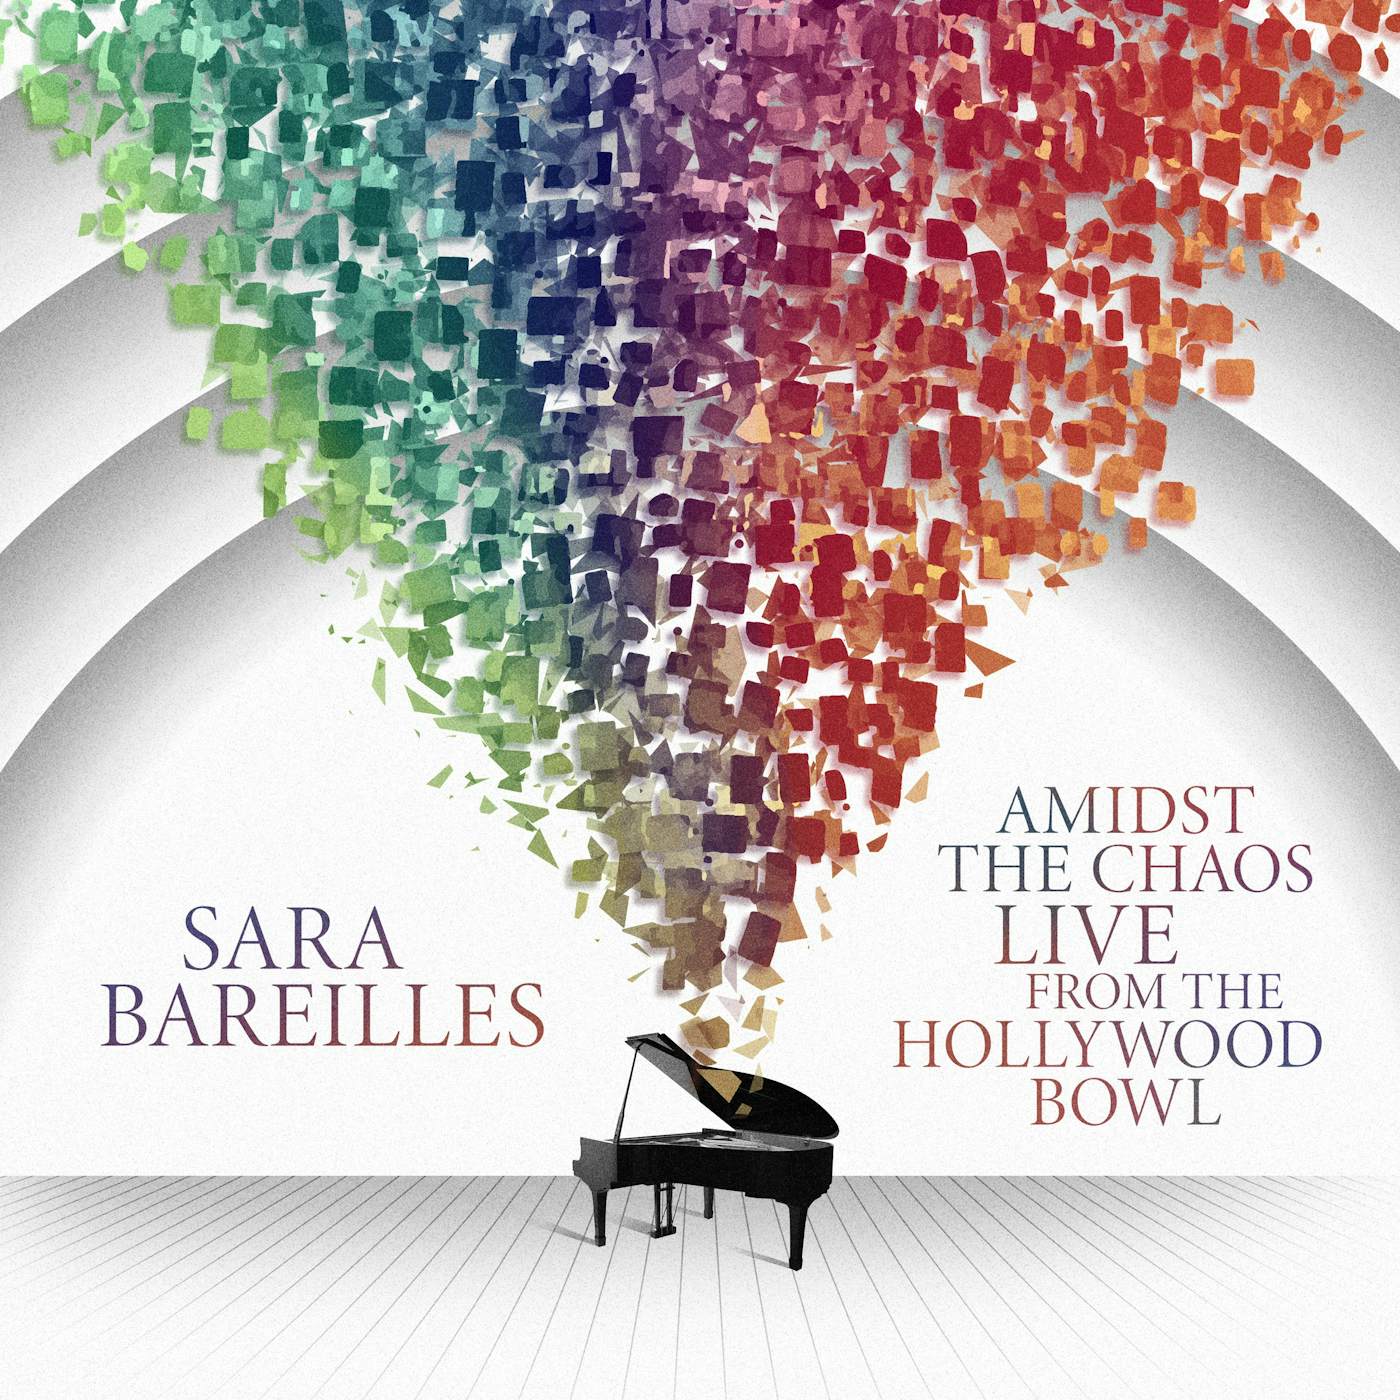 Sara Bareilles Amidst the Chaos: Live from the Hollywood Bowl Digital Download